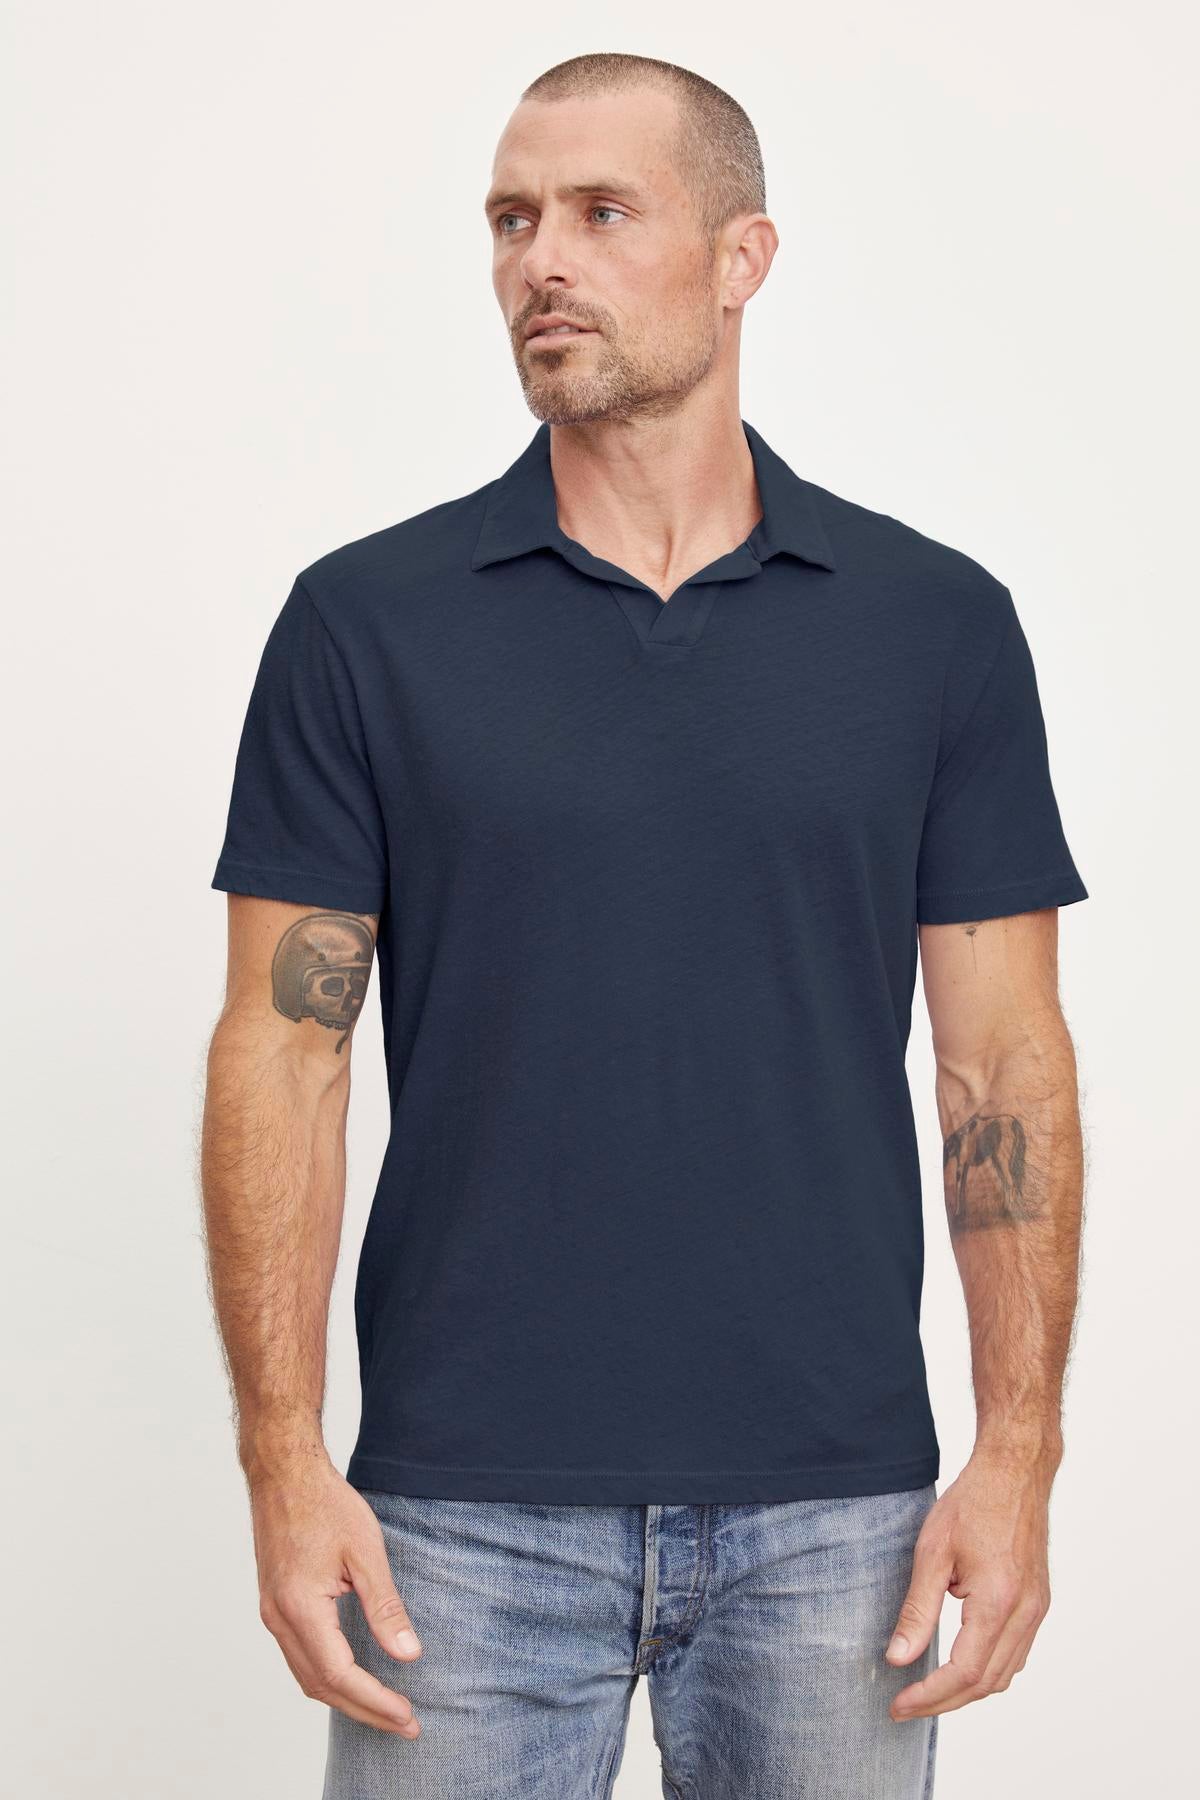   A man in a navy Velvet by Graham & Spencer BECK Polo shirt and jeans stands facing forward, with visible tattoos on both forearms. 